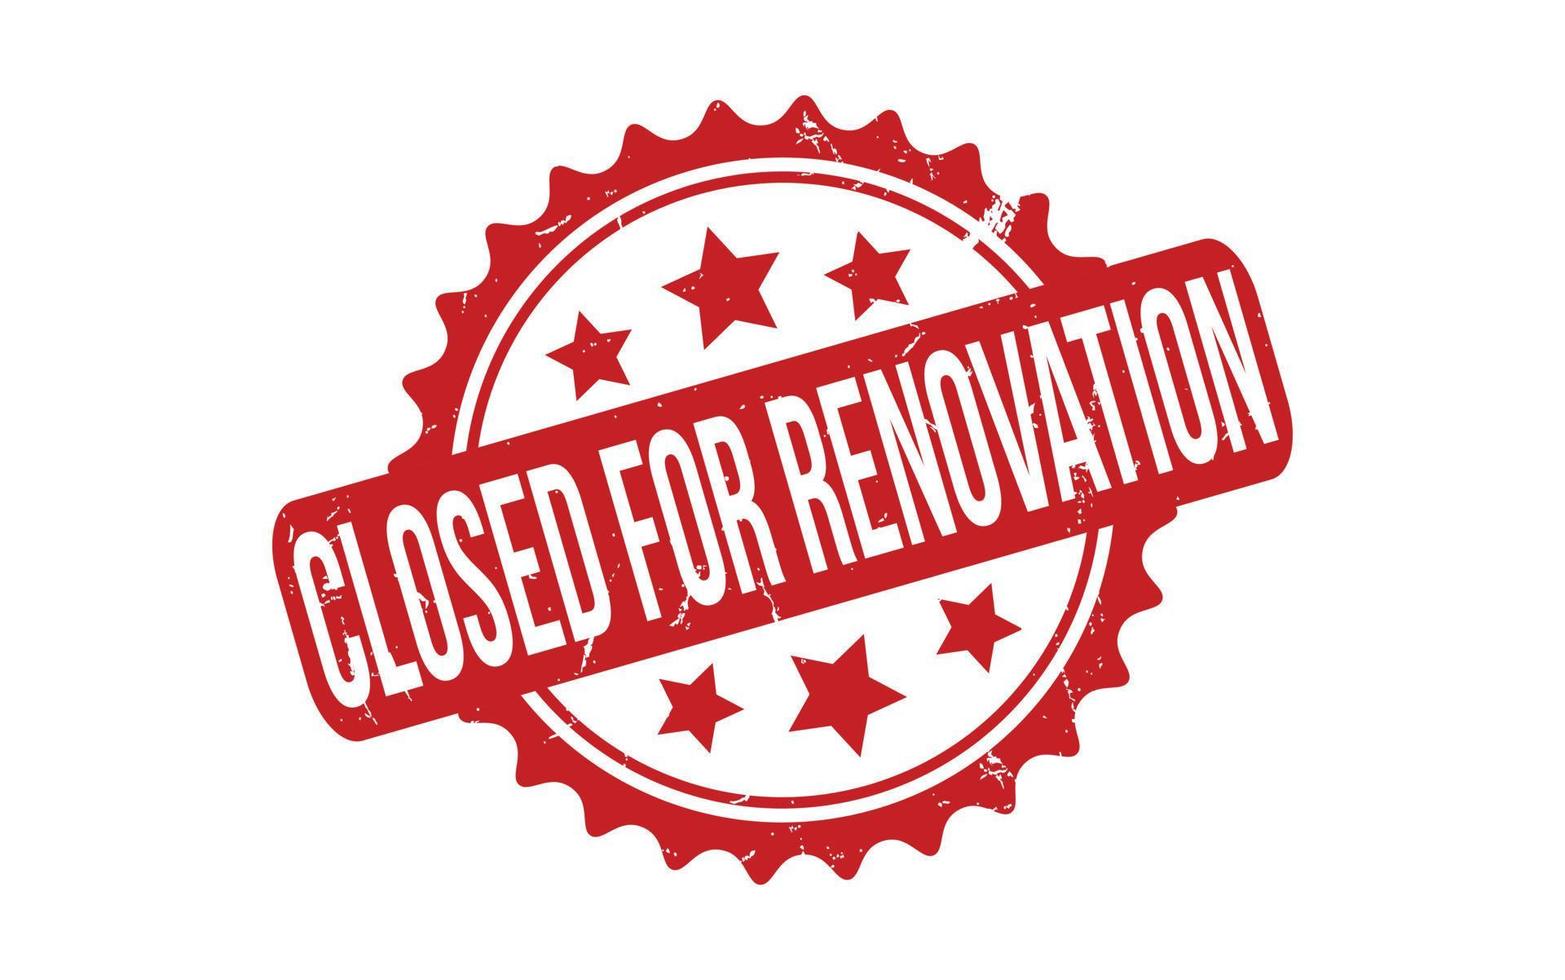 Closed for Renovation rubber grunge stamp seal vector